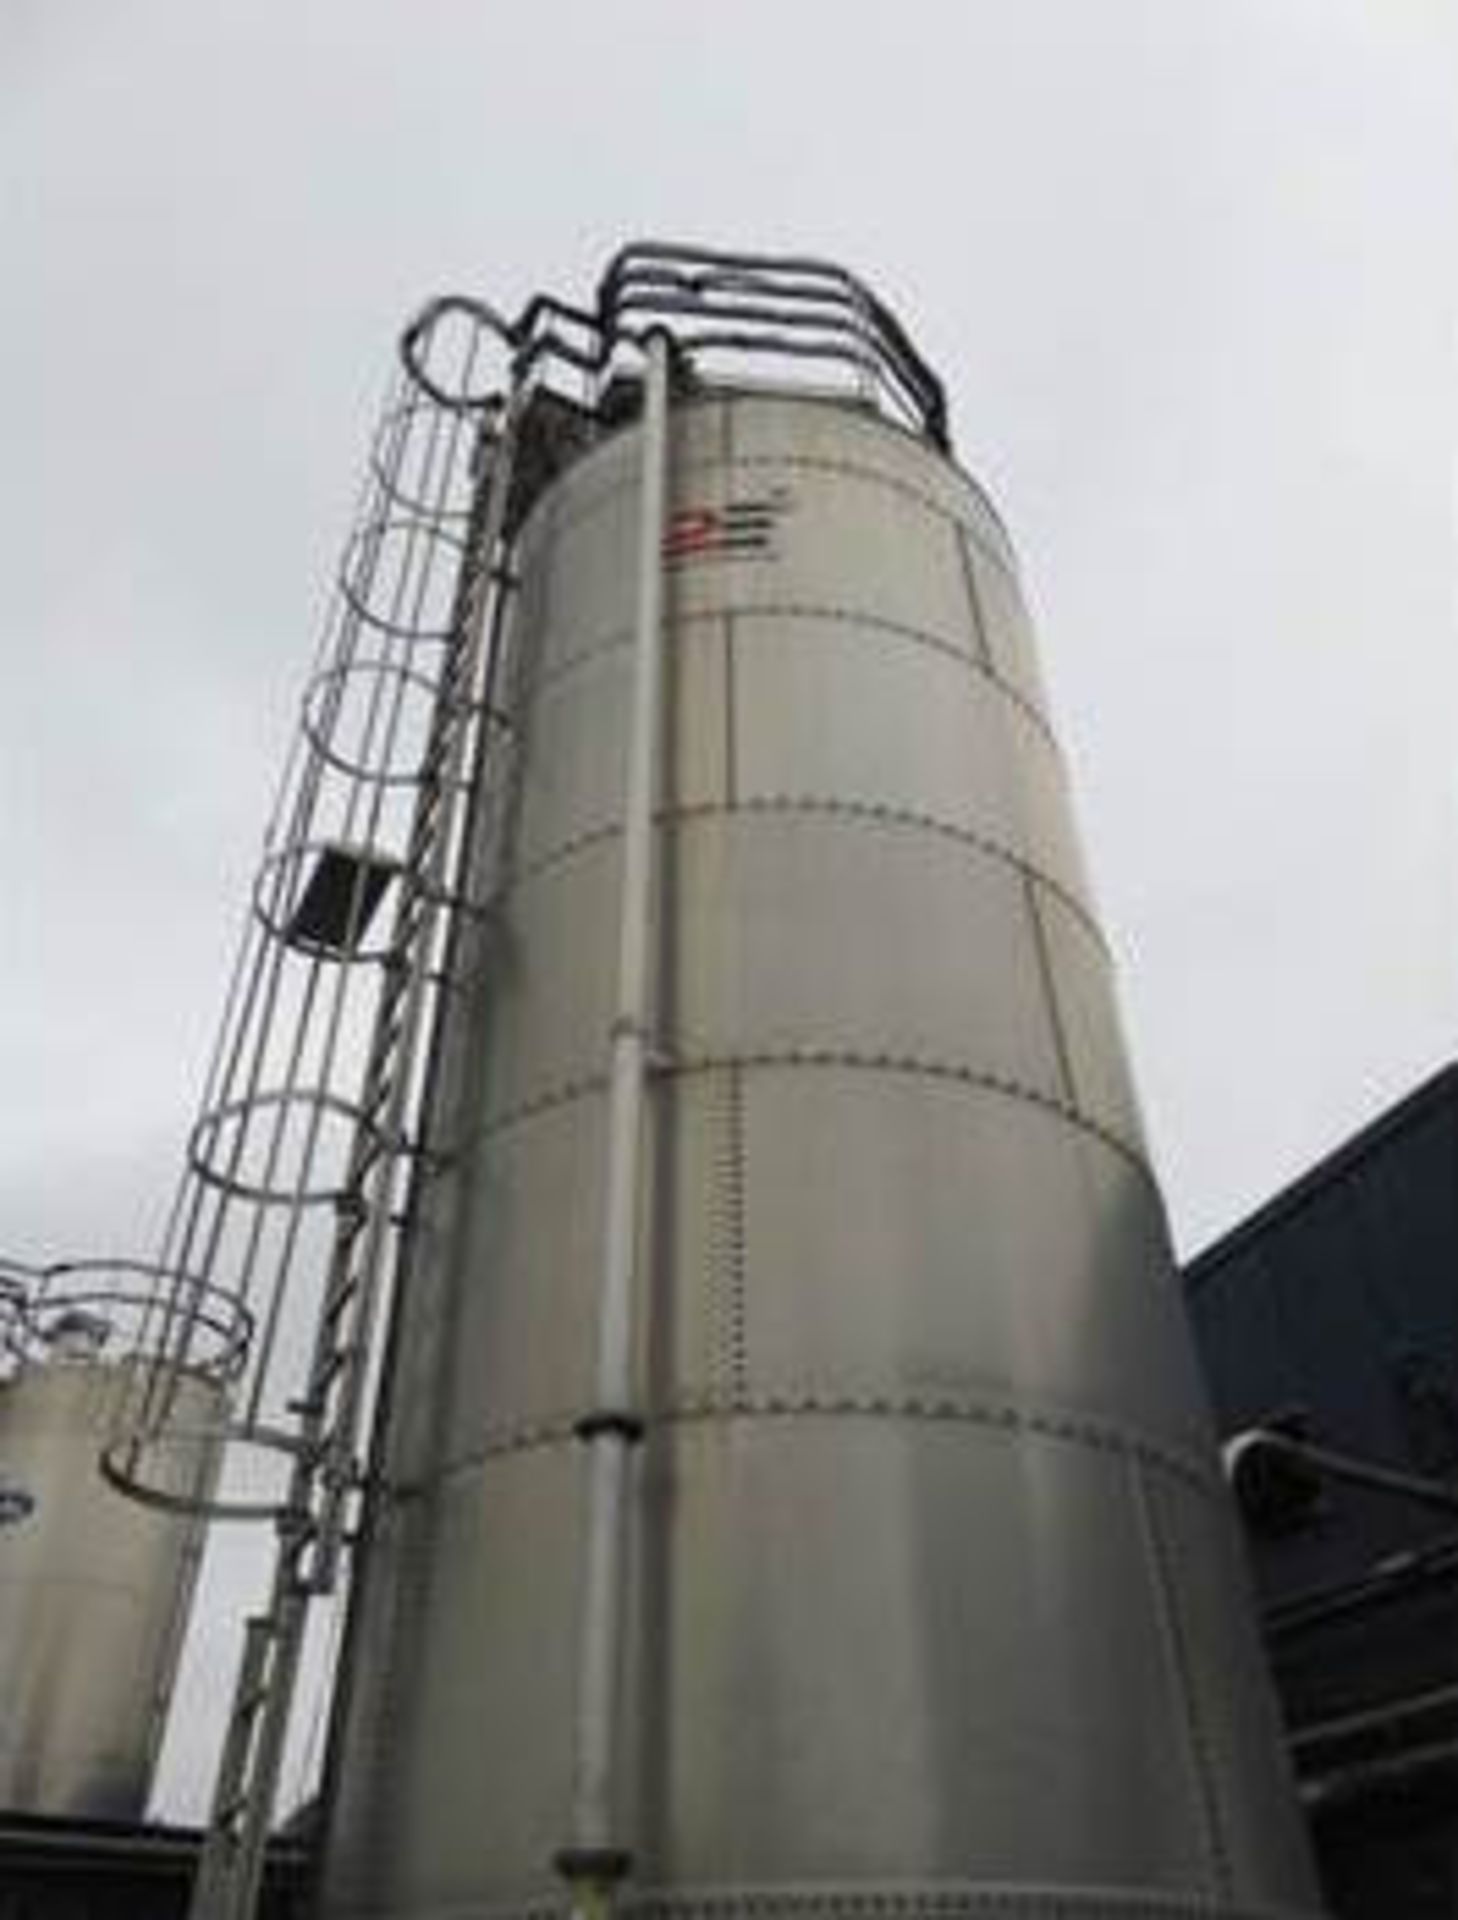 Ellgard Equipment 30 tonne Silo. BTR or lift out charge £2,500 - Image 4 of 5